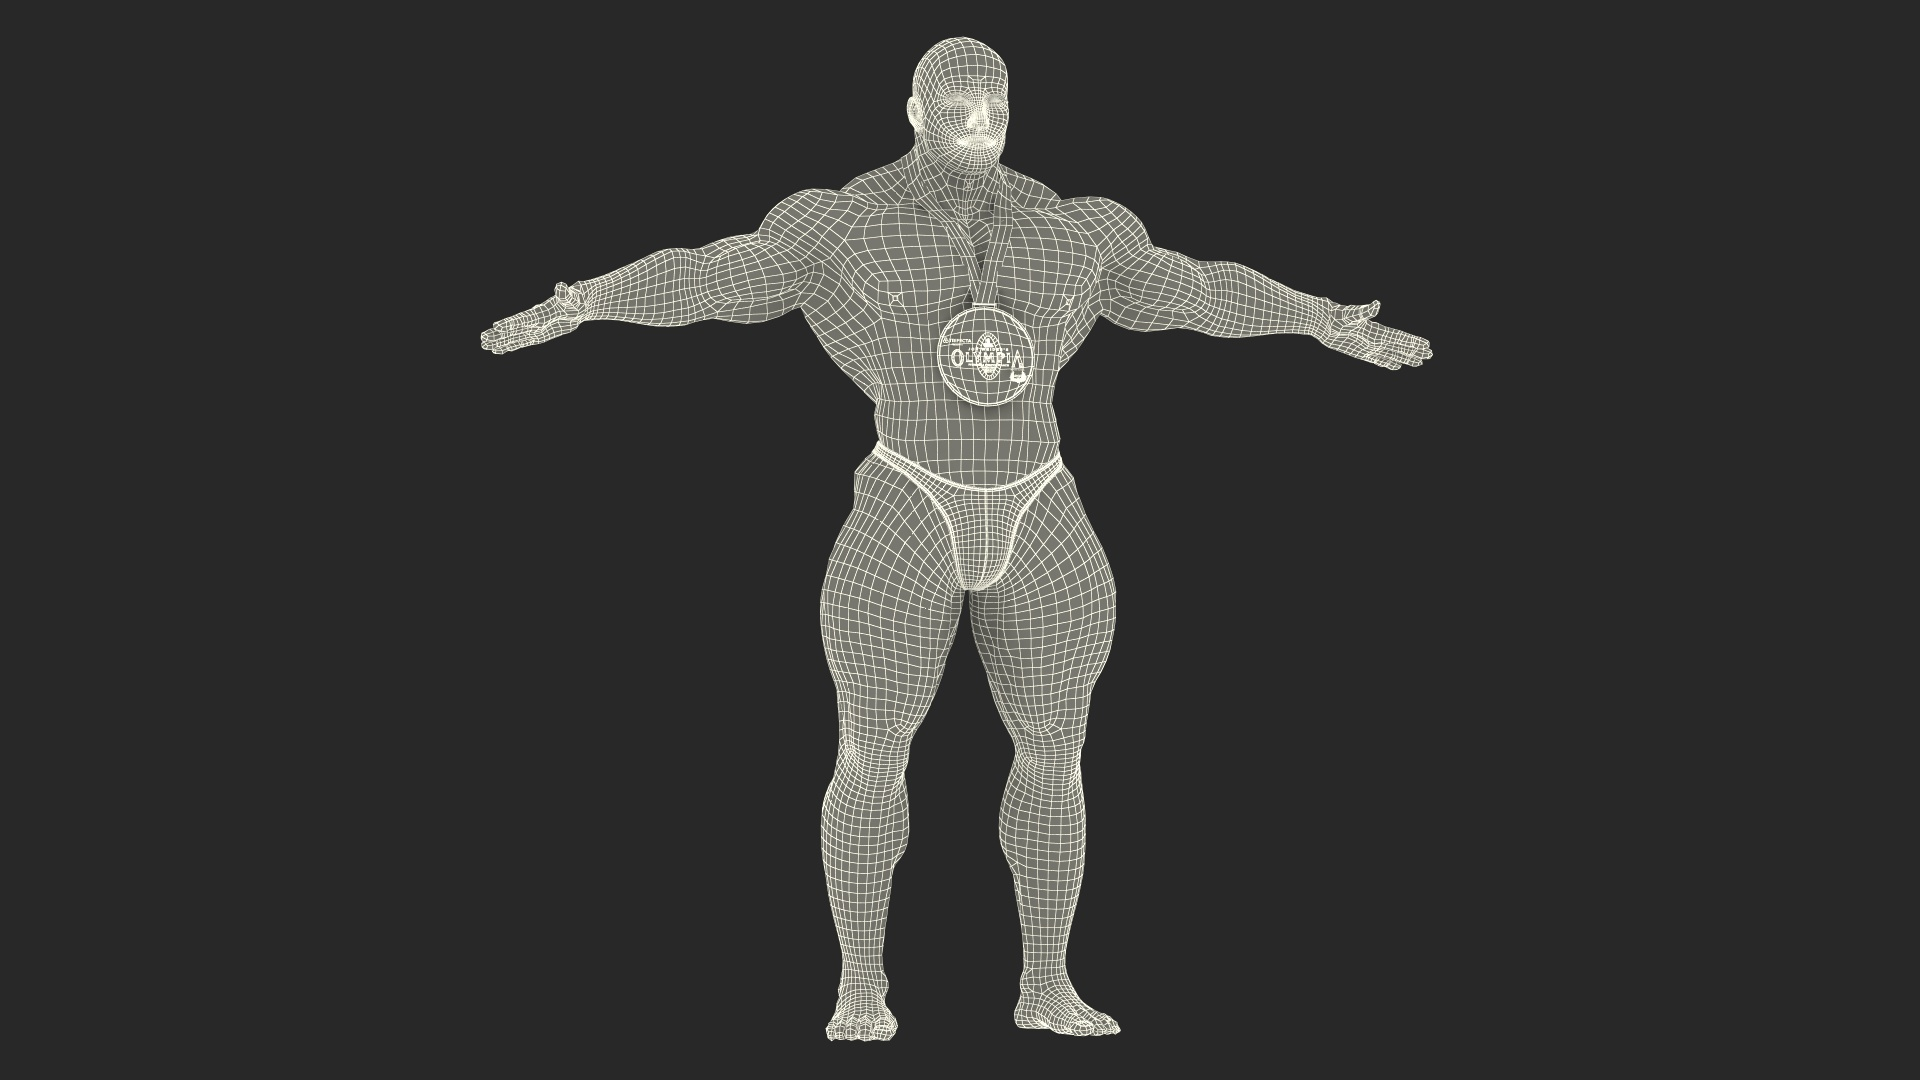 I made an image comparing famous bodybuilders by their poses. Who do you  think is the best of each pose? : r/bodybuilding